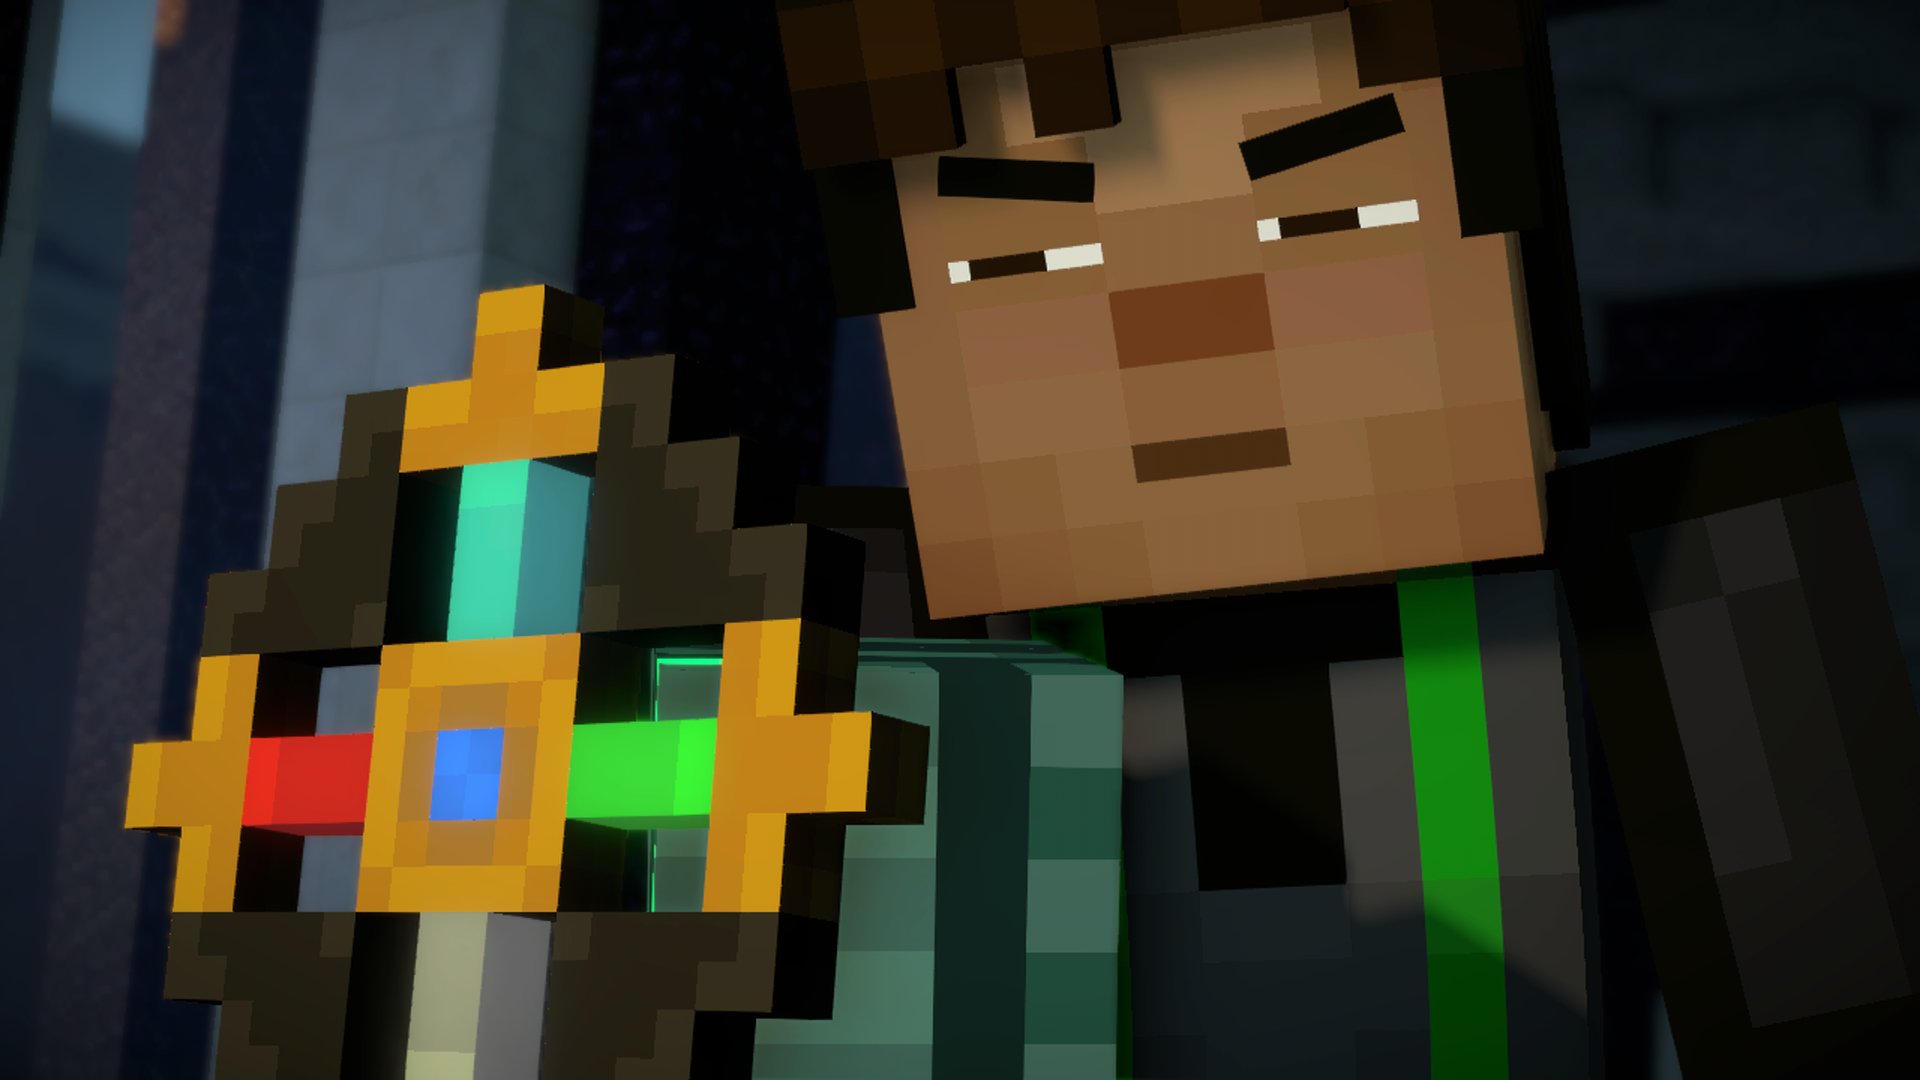 Minecraft Story Mode Season 3 is it too late!? 